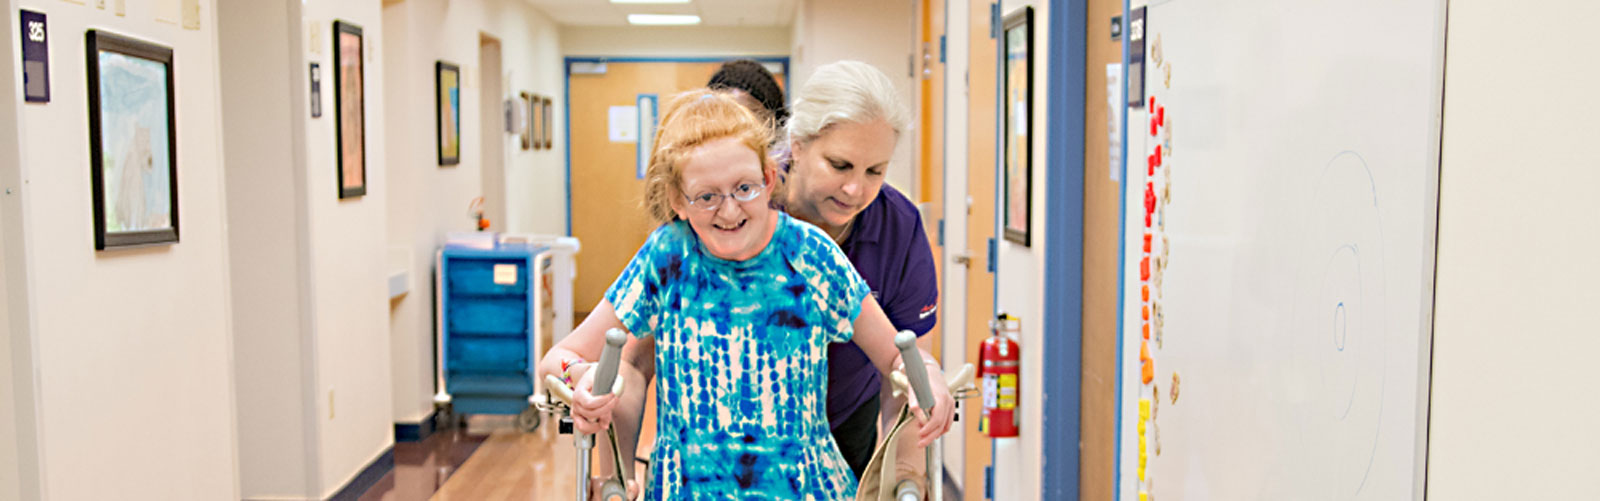 A patient receives rehabilitation services at Kennedy Krieger.